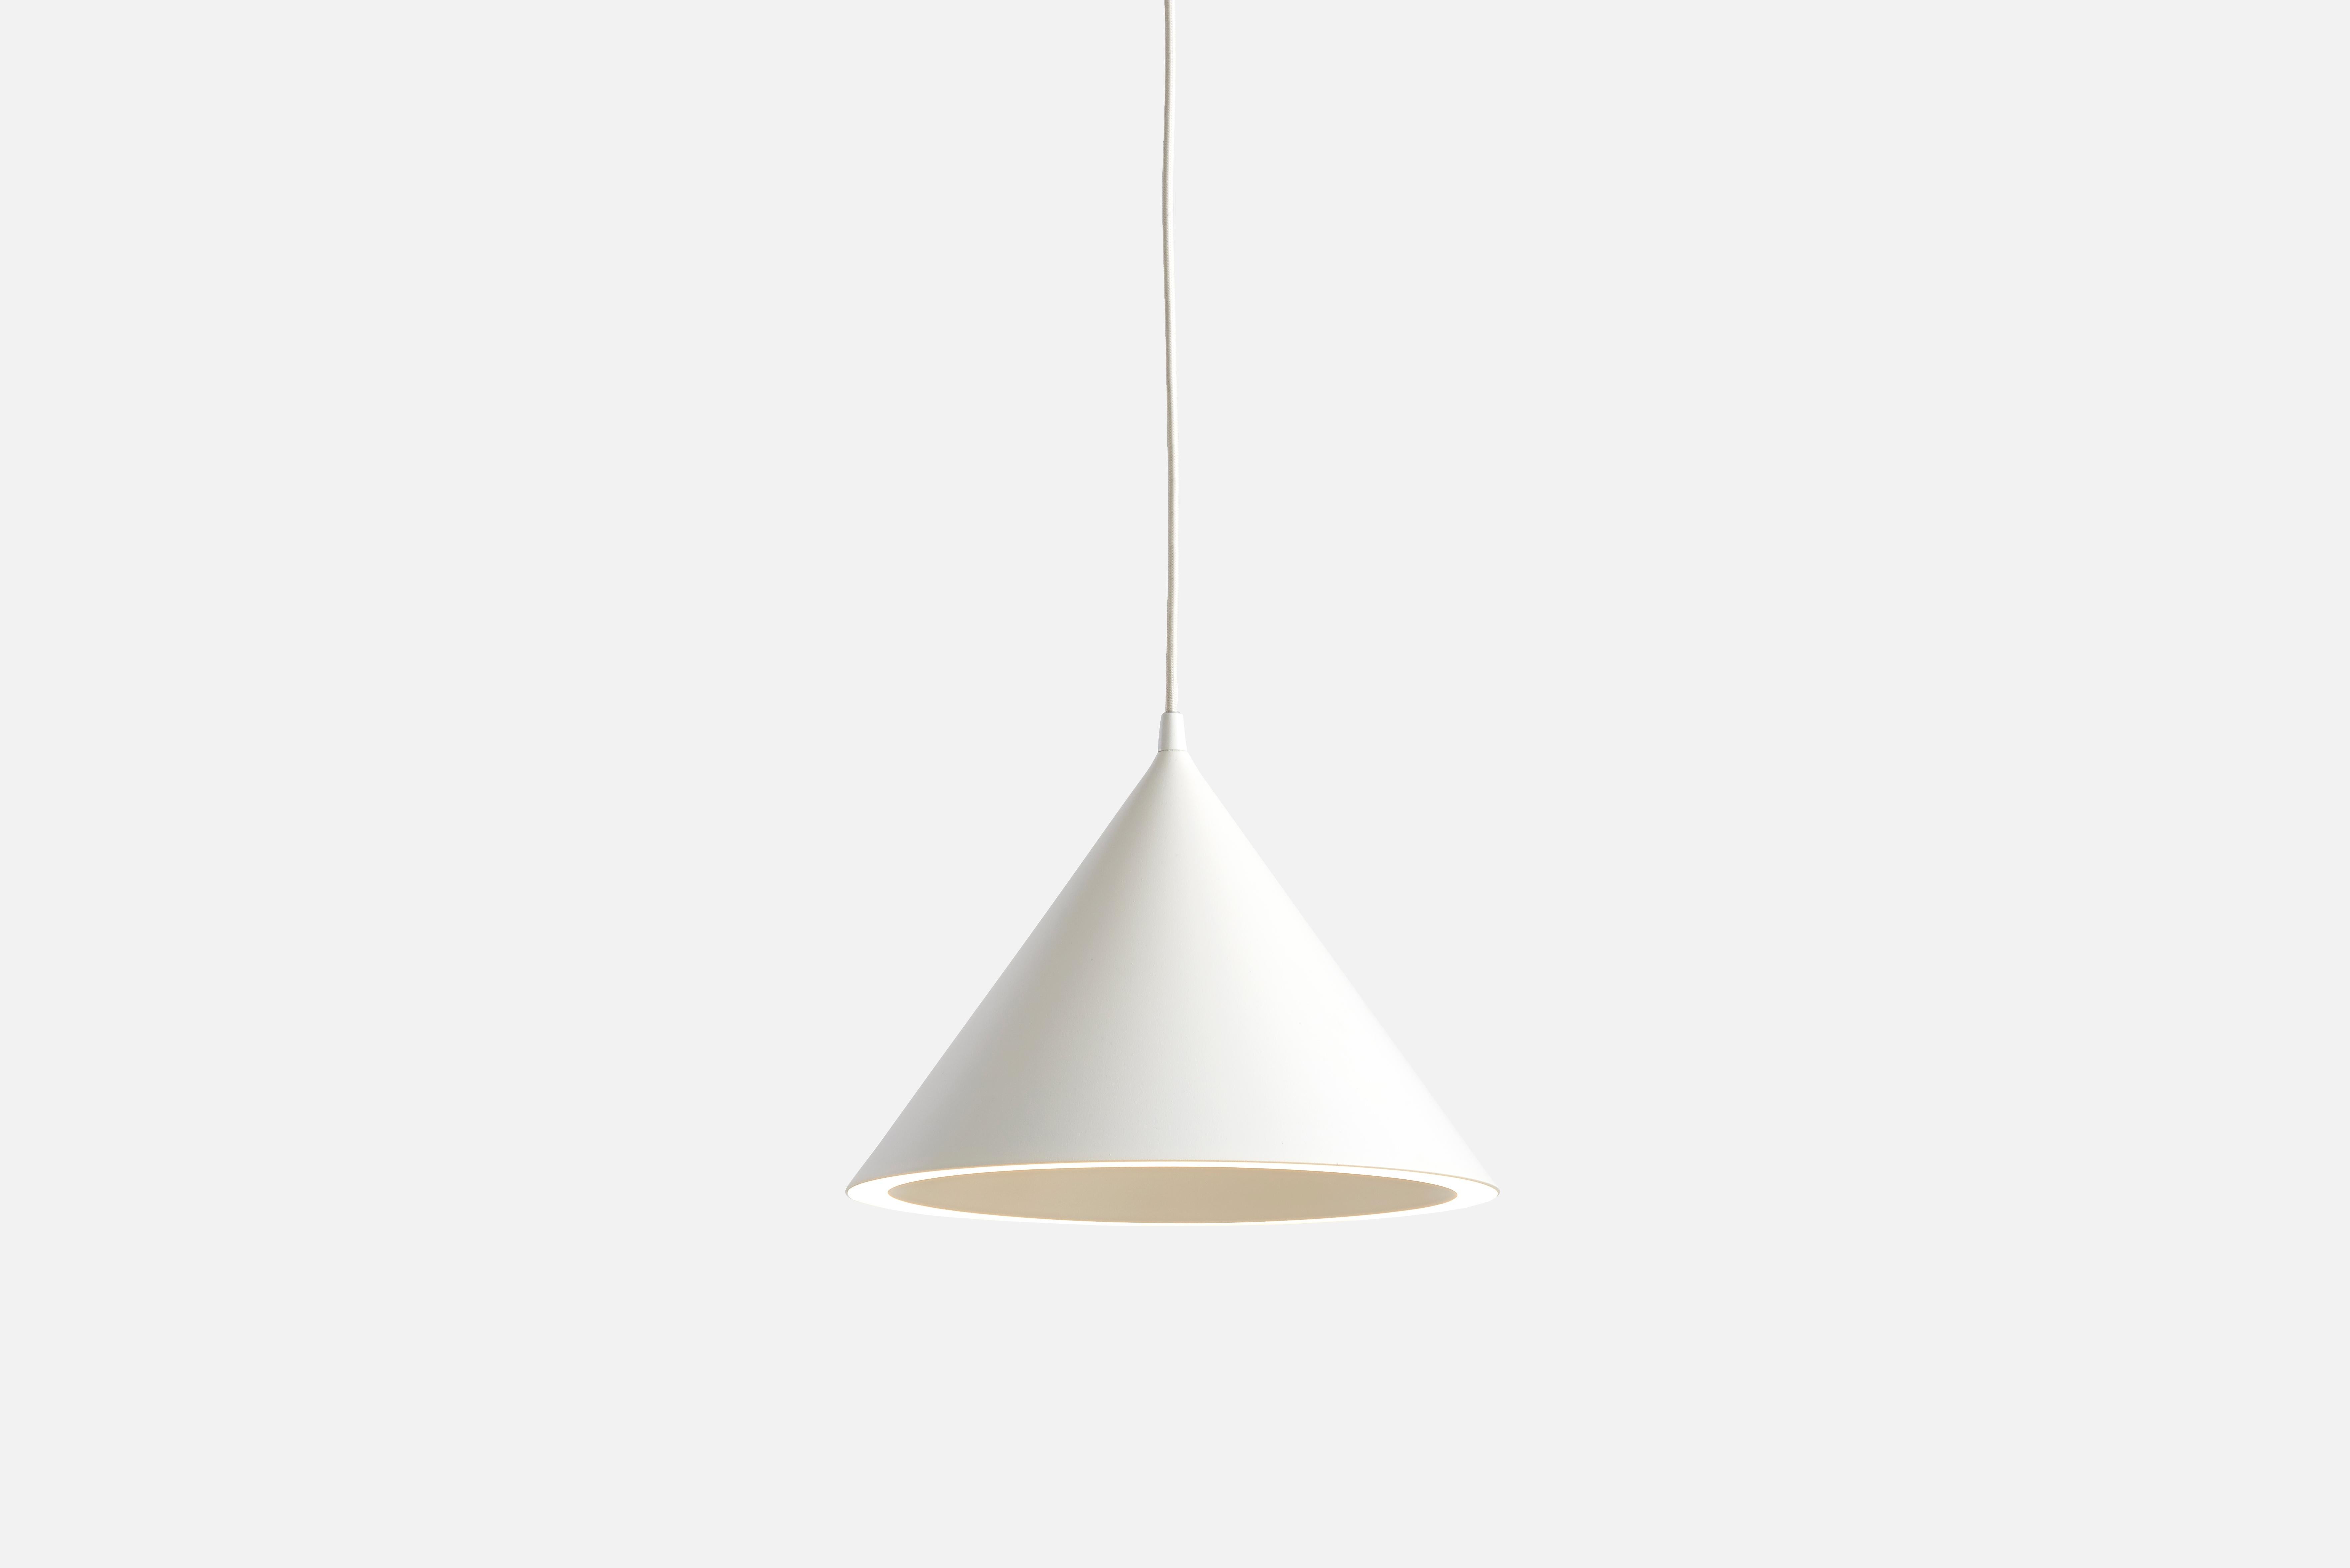 Small white annular pendant lamp by MSDS Studio
Materials: Aluminum.
Dimensions: D 32 x H 23.8 cm
Available in white, nude, mint, black.
Available in 2 sizes: D 32, D 46.8 cm.

MSDS Studio is a successful Canadian design studio that works in